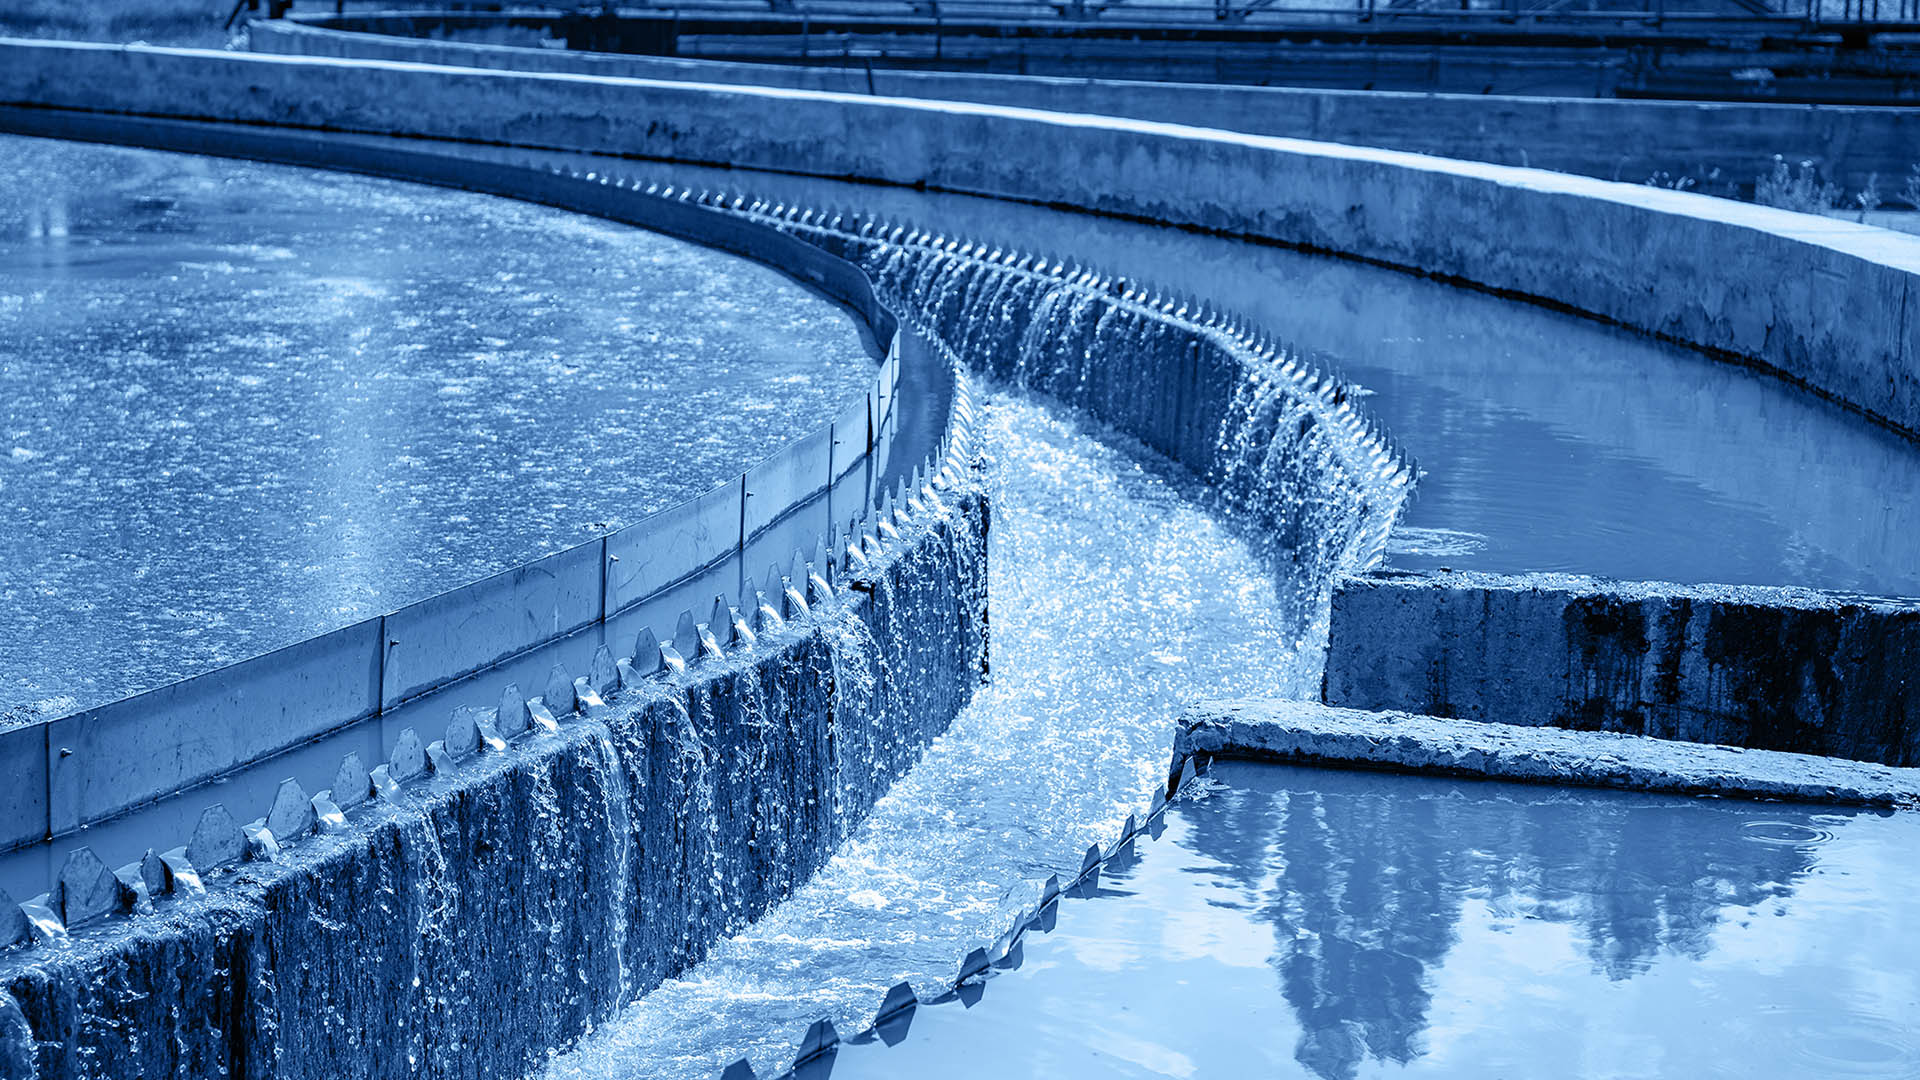 Tanks or reservoirs for aeration and purification or cleansing sewage in wastewater treatment plant.